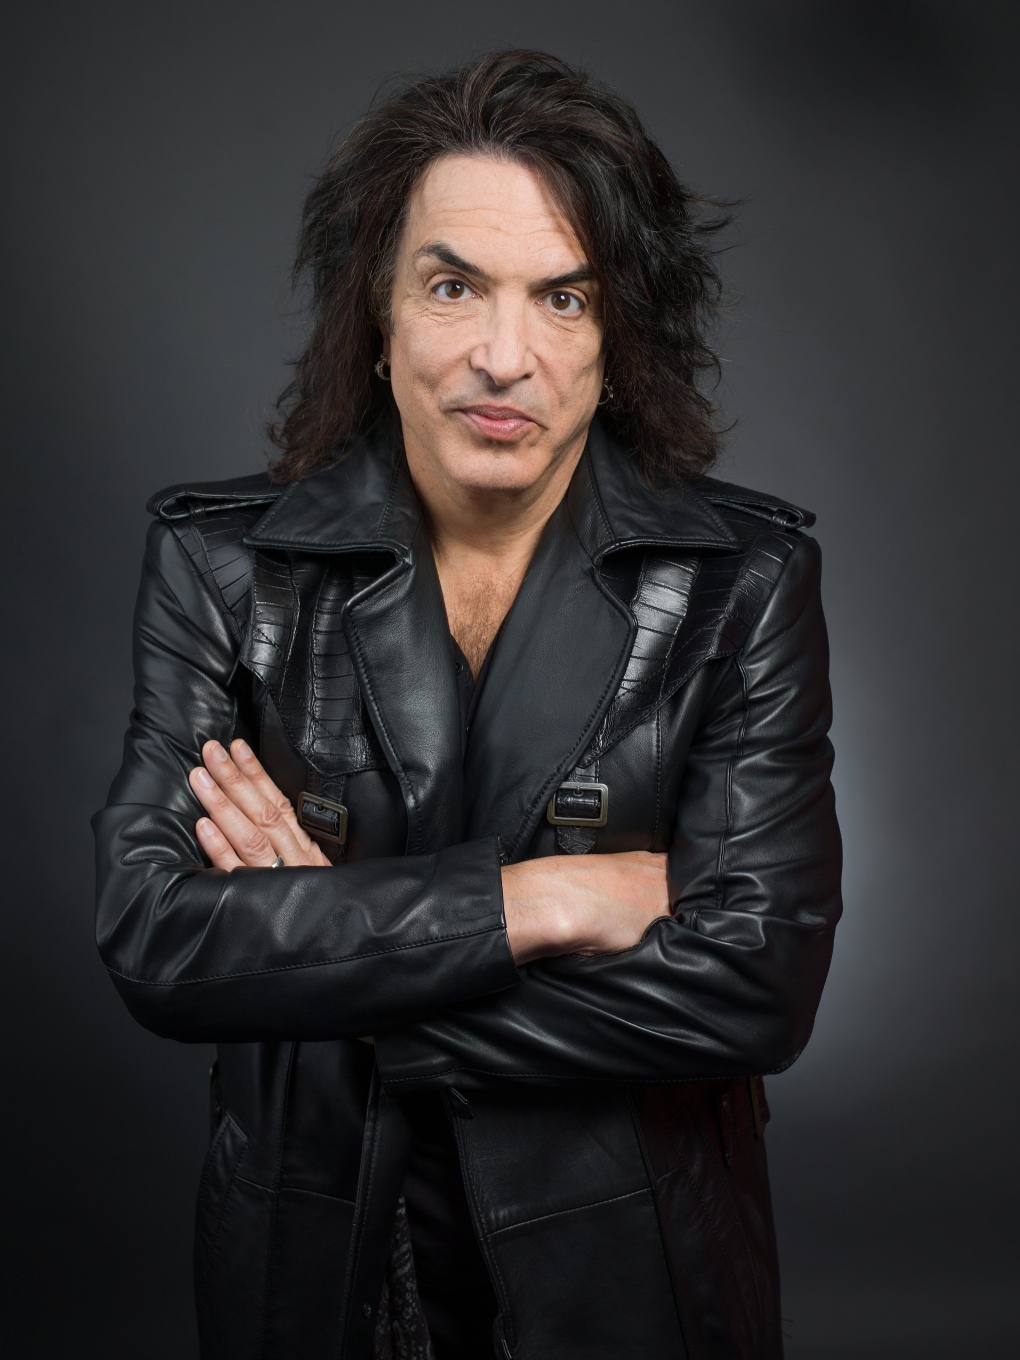 Paul Stanley opens up about bullying